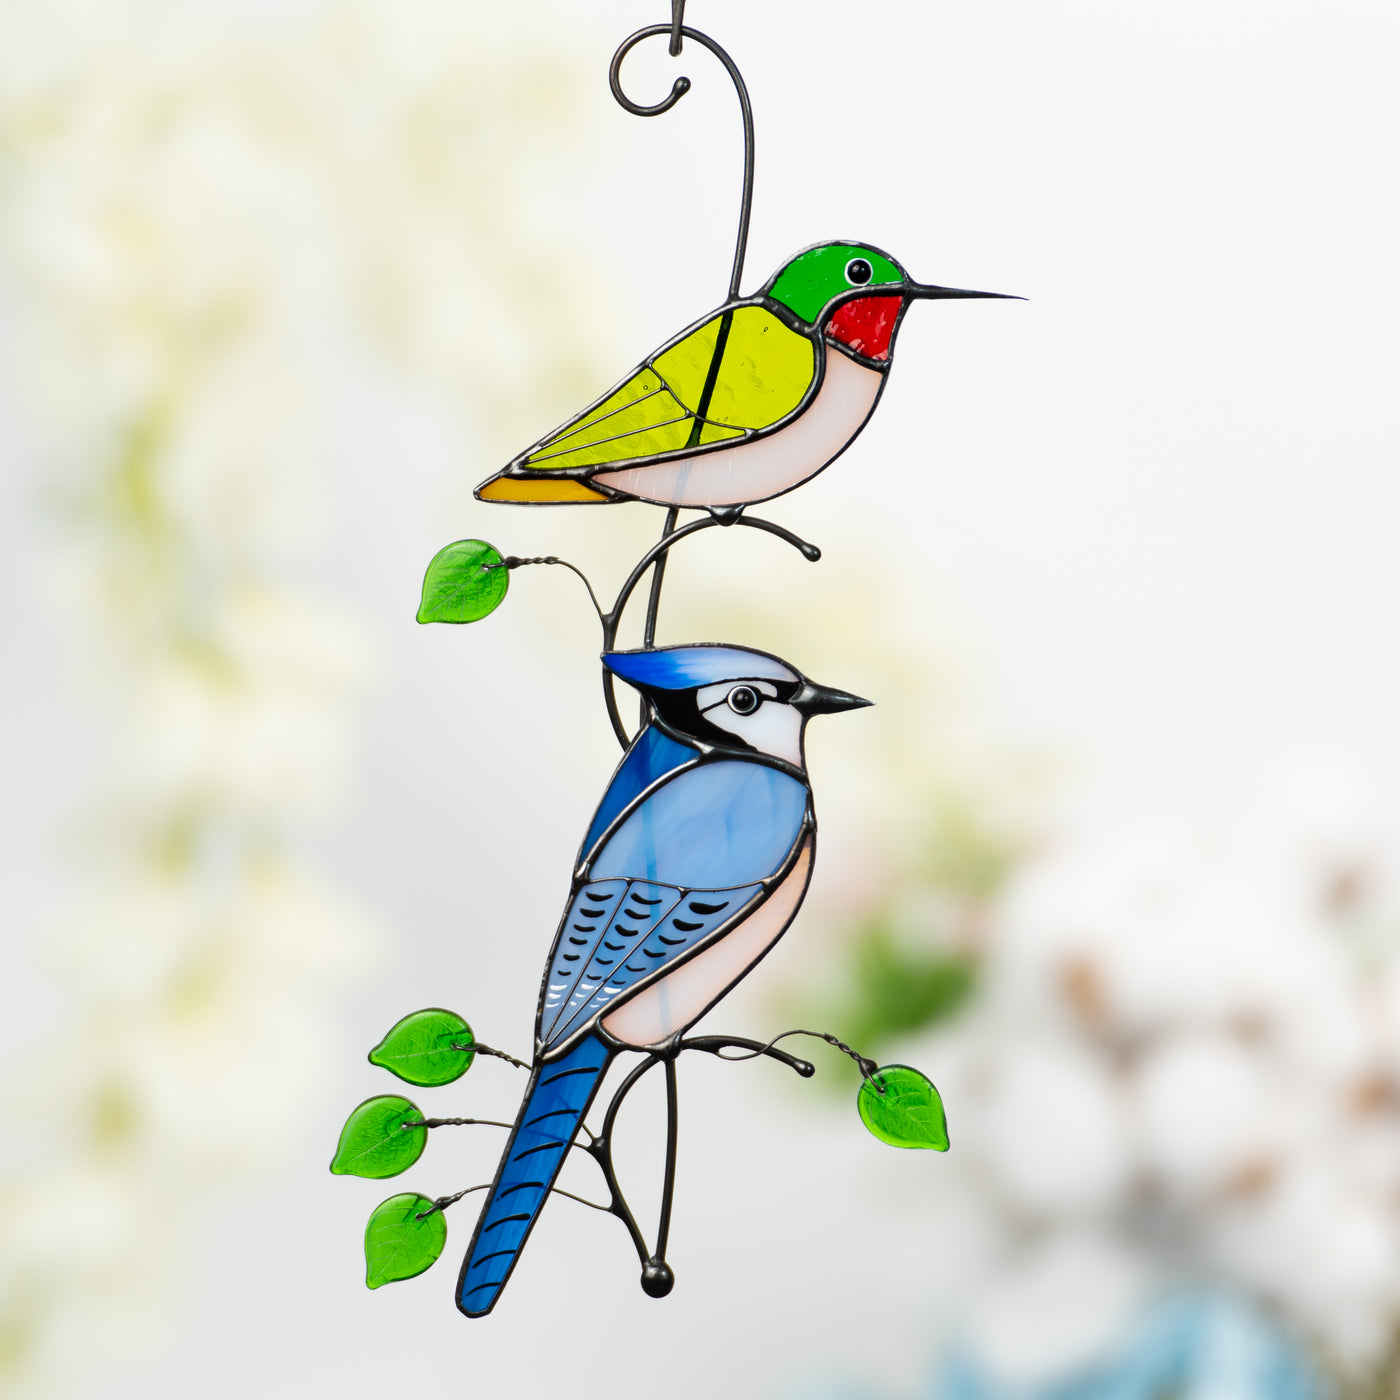 Green hummingbird and a bluejay suncatcher of stained glass